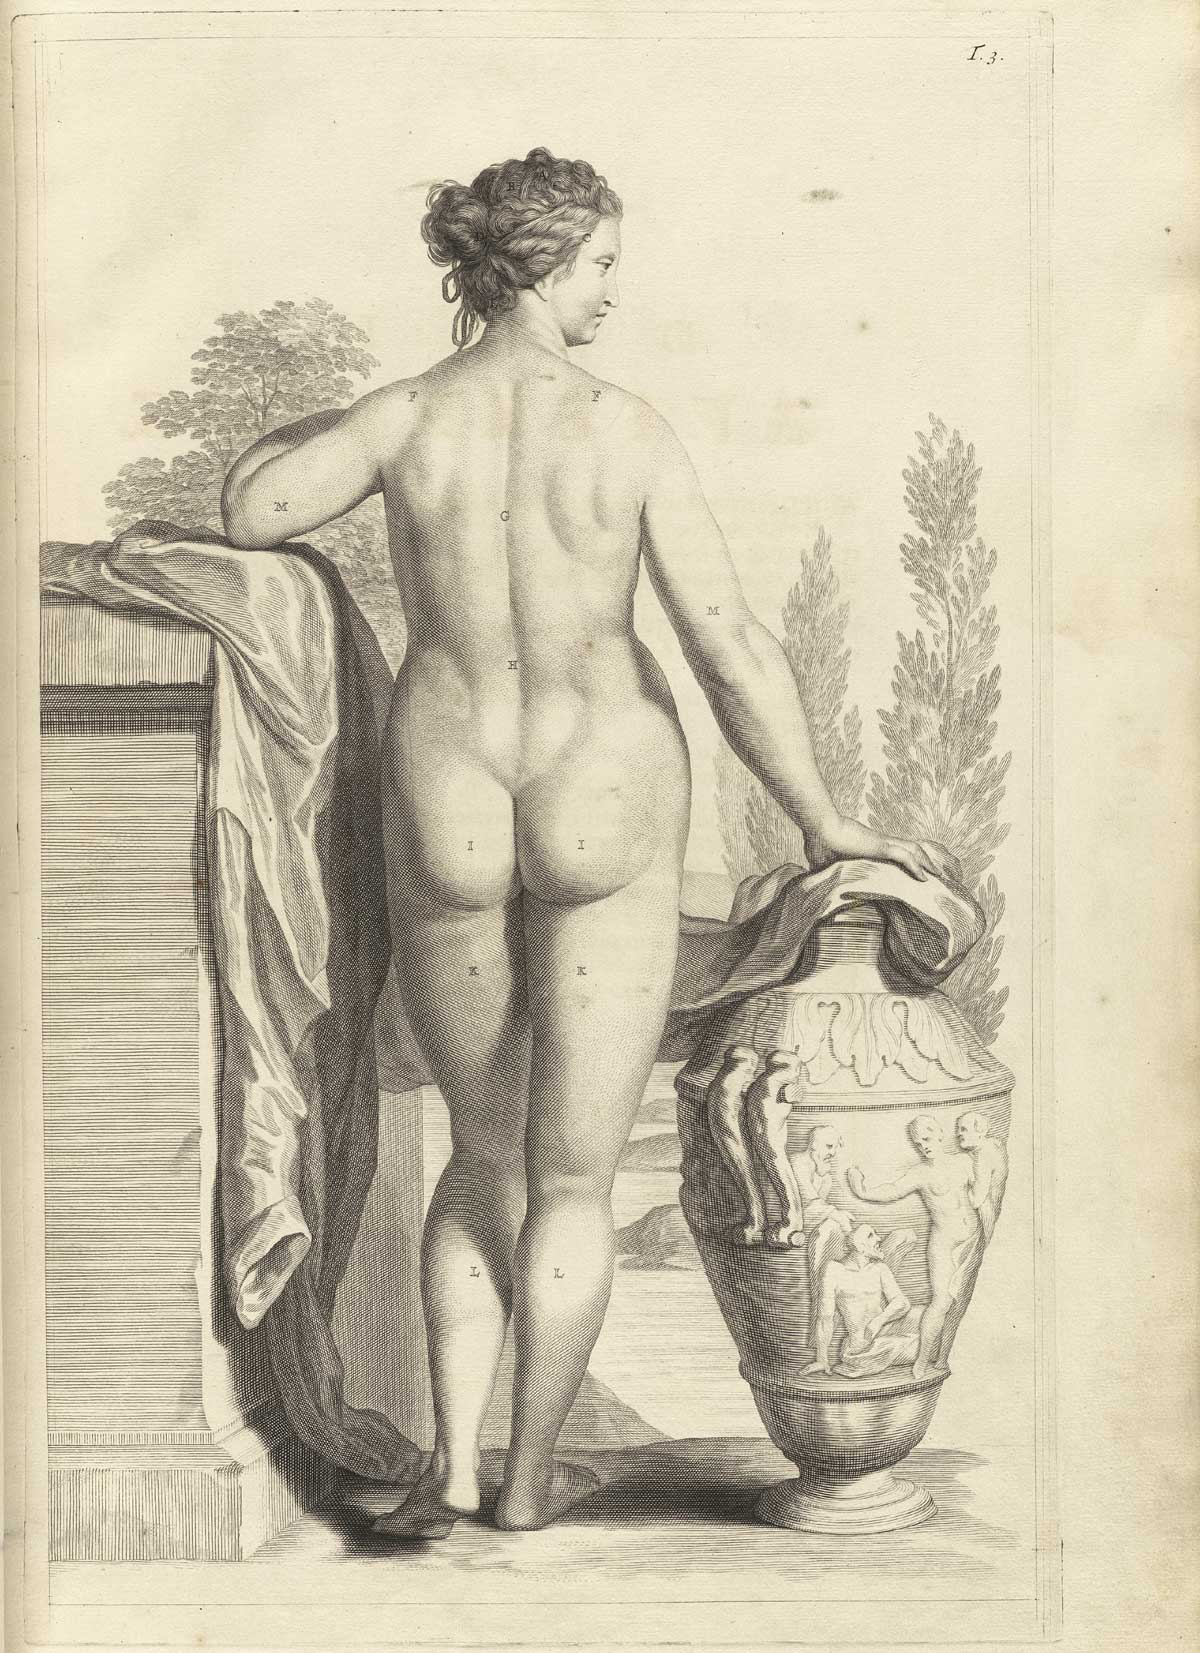 Engraved rear-facing female nude figure, standing in Classical pose looking to the right with her right hand on top of a large urn and left on a Classical pediment, with index letters pointing to different parts of the body, from Govard Bidloo’s Ontleding Des Menschelyken Lichaams, Amsterdam, 1690, NLM Call no. WZ 250 B5855anDu 1690.